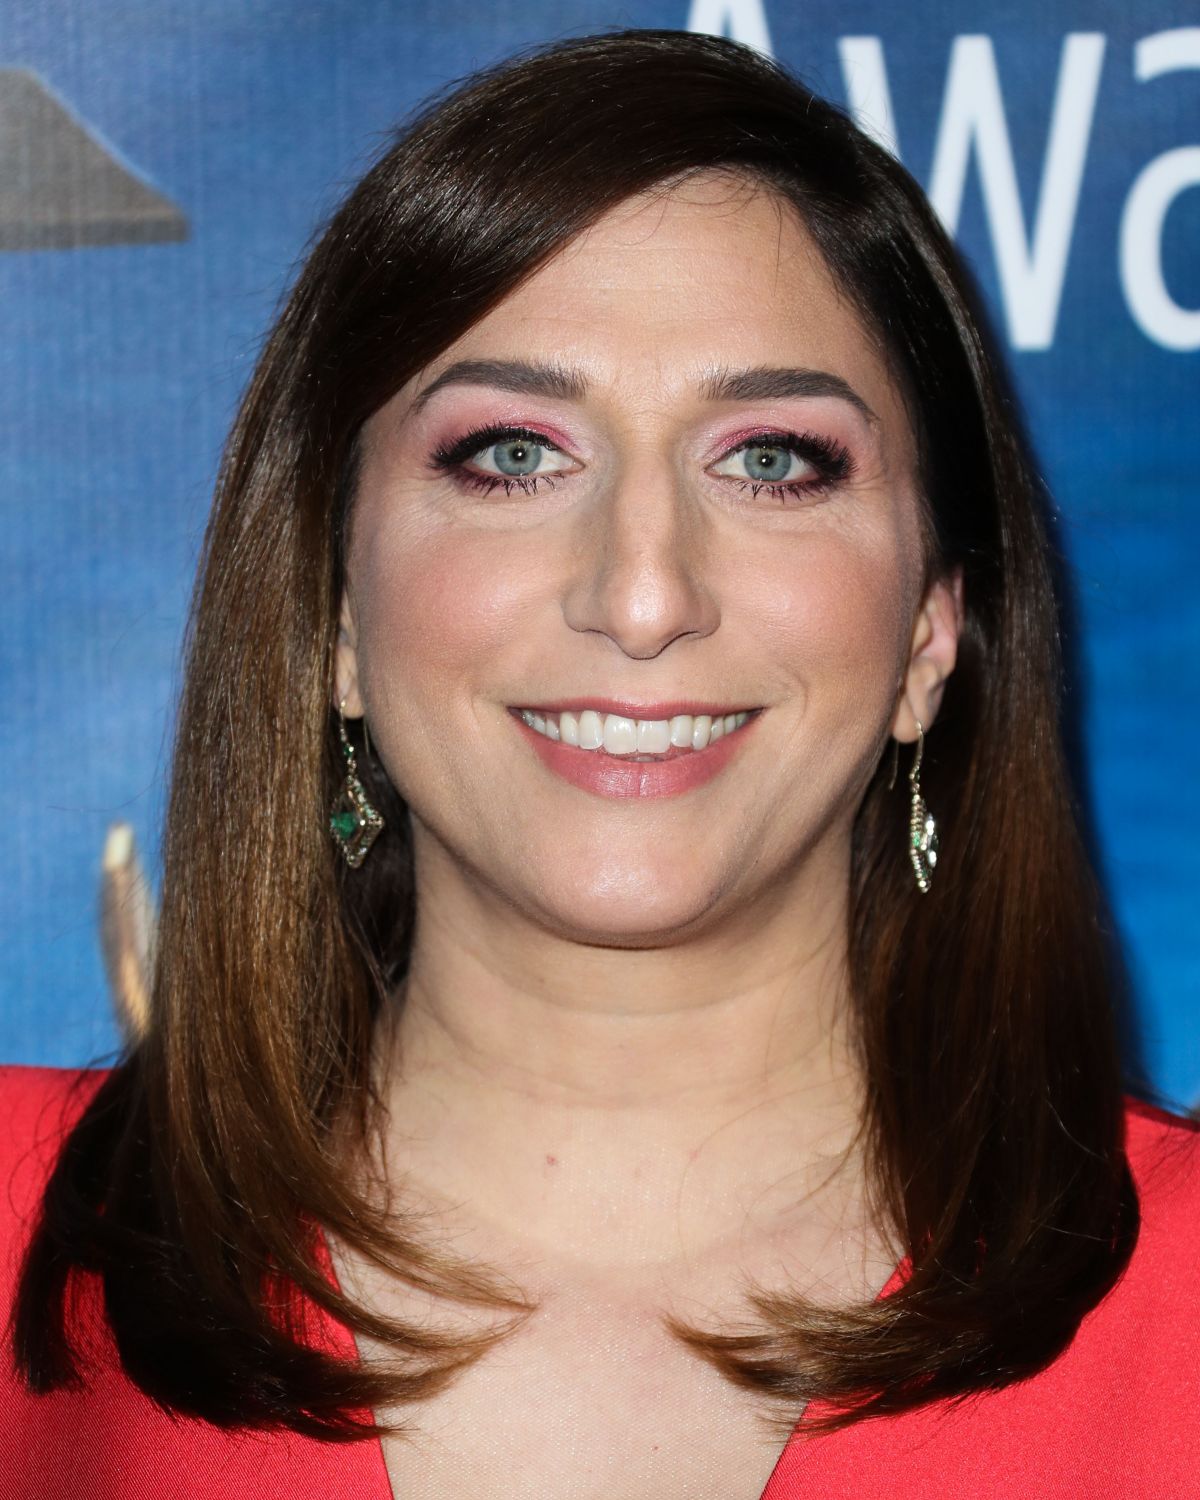 CHELSEA PERETTI at Writers Guild Awards in Los Angles 02/17/2019